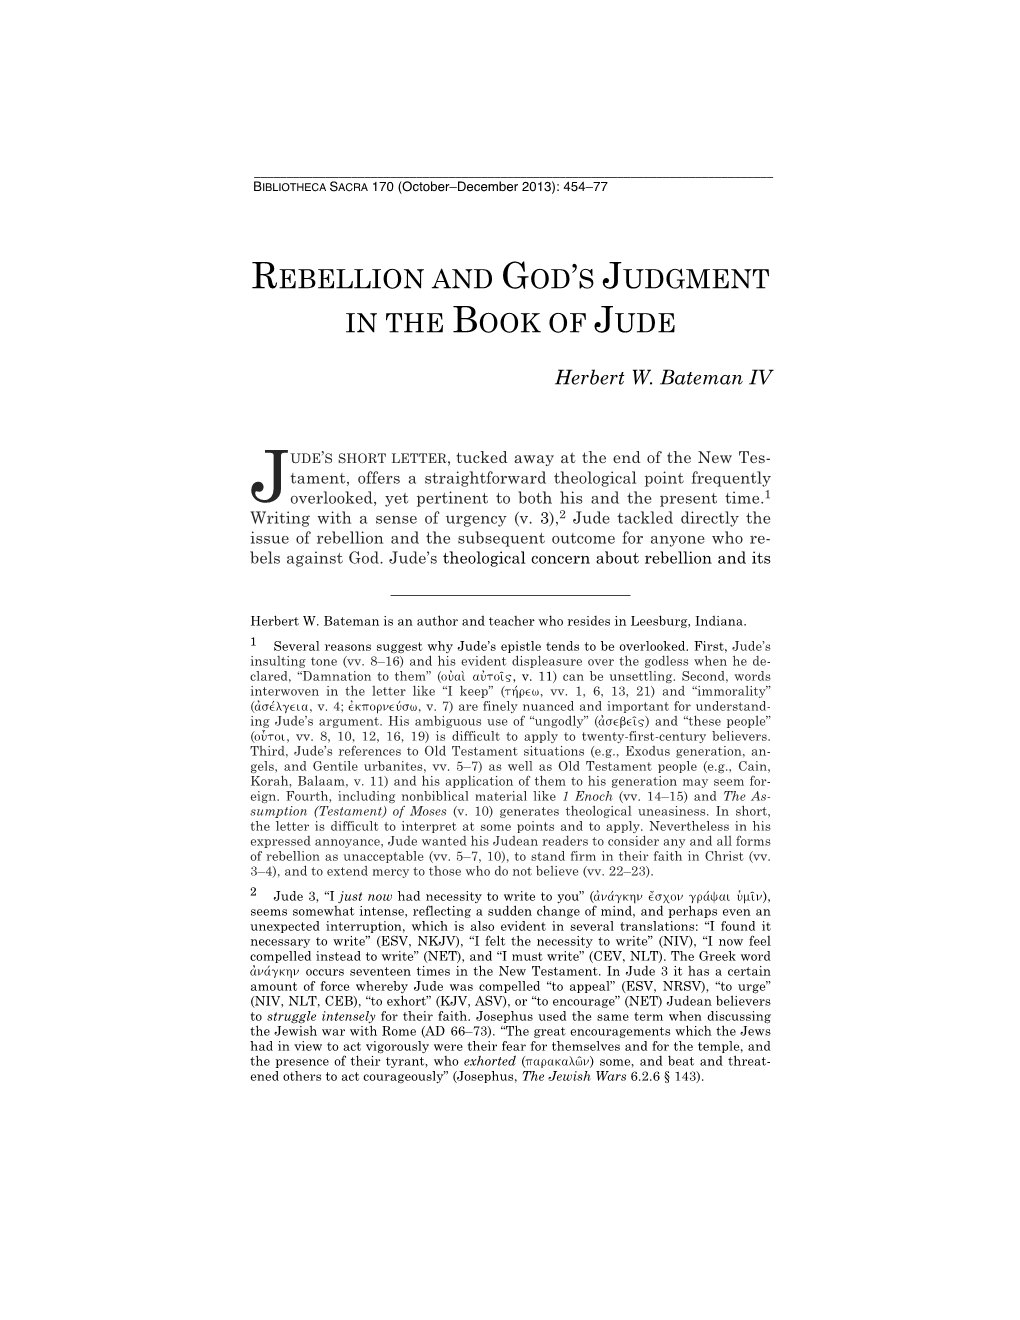 Rebellion and God's Judgment in the Book of Jude